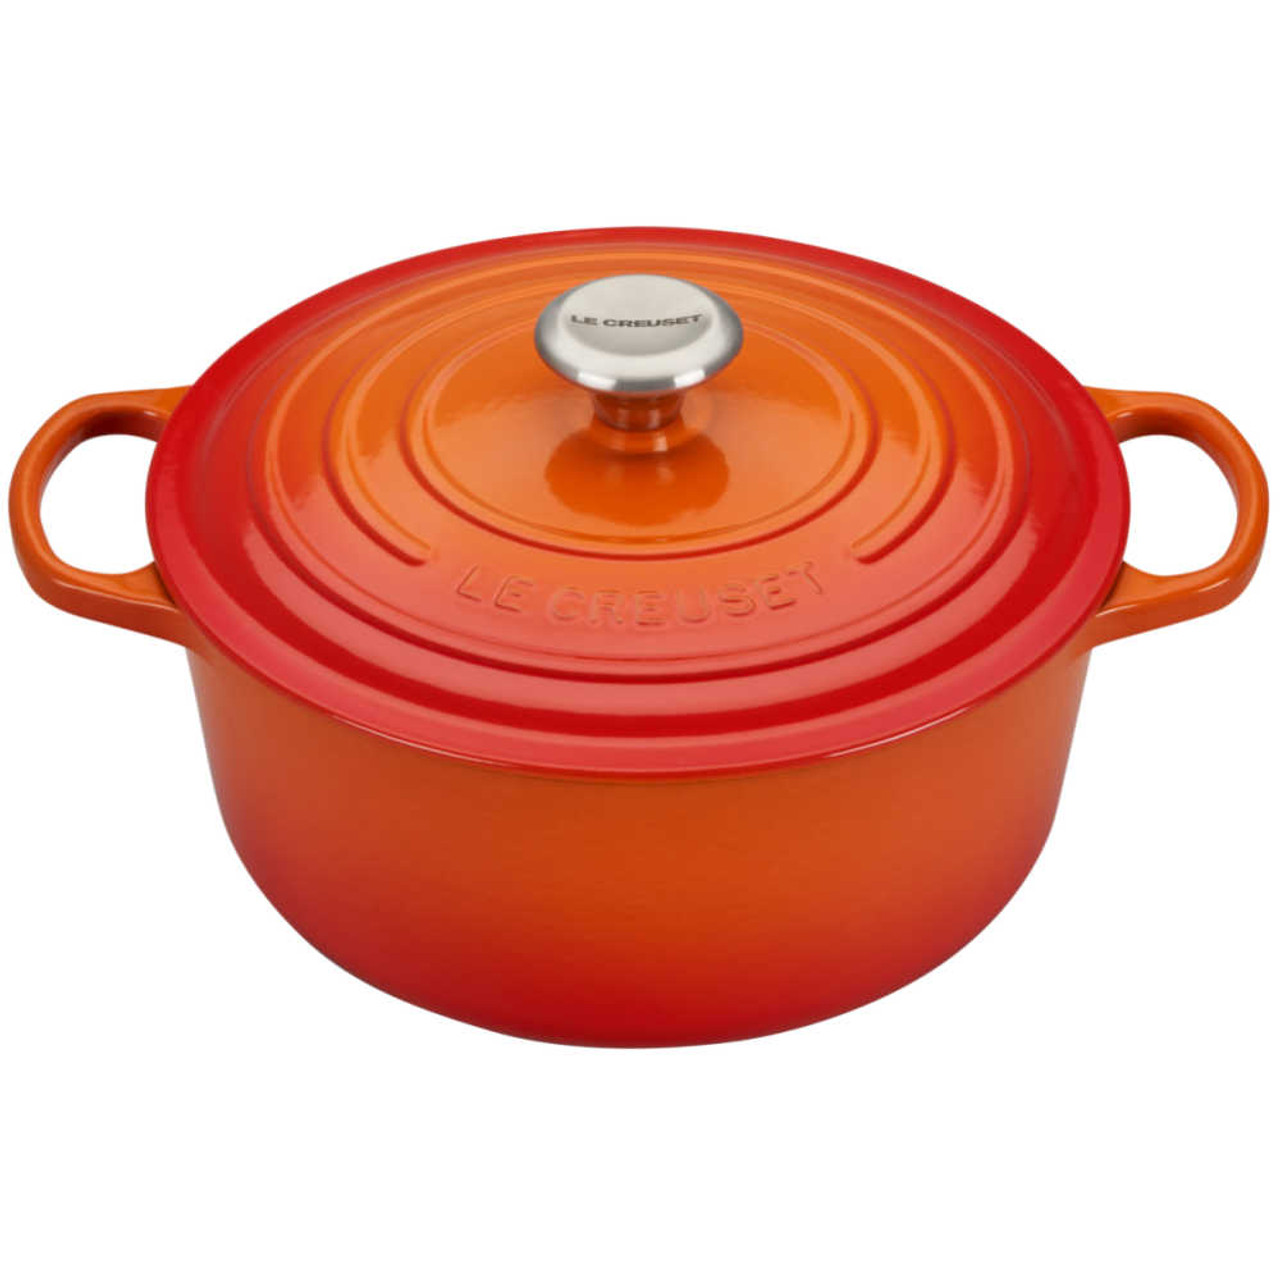 https://cdn11.bigcommerce.com/s-hccytny0od/images/stencil/1280x1280/products/1787/17598/Le_Creuset_Round_Dutch_Oven_Flame__11651.1639879540.jpg?c=2?imbypass=on